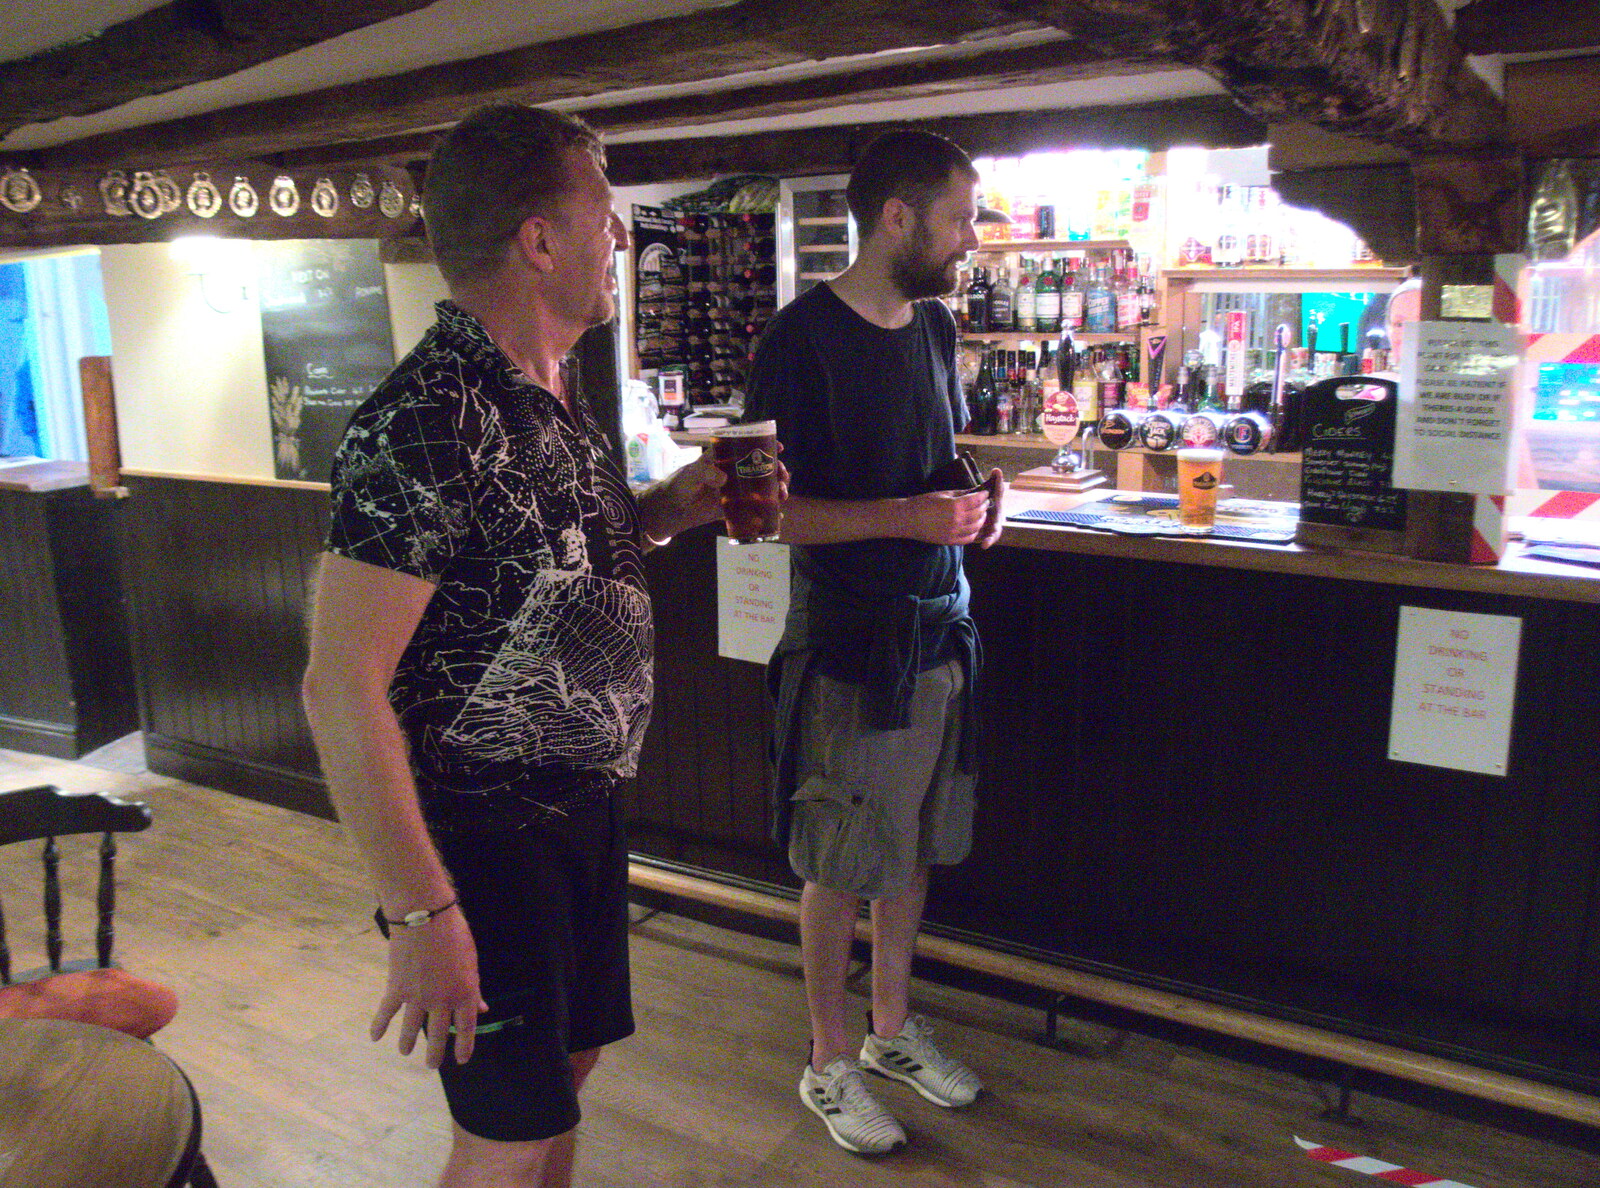 Gaz and The Boy Phil at the Beaconsfield Arms from The BSCC at The Earl Soham Victoria and Station 119, Eye, Suffolk - 6th August 2020